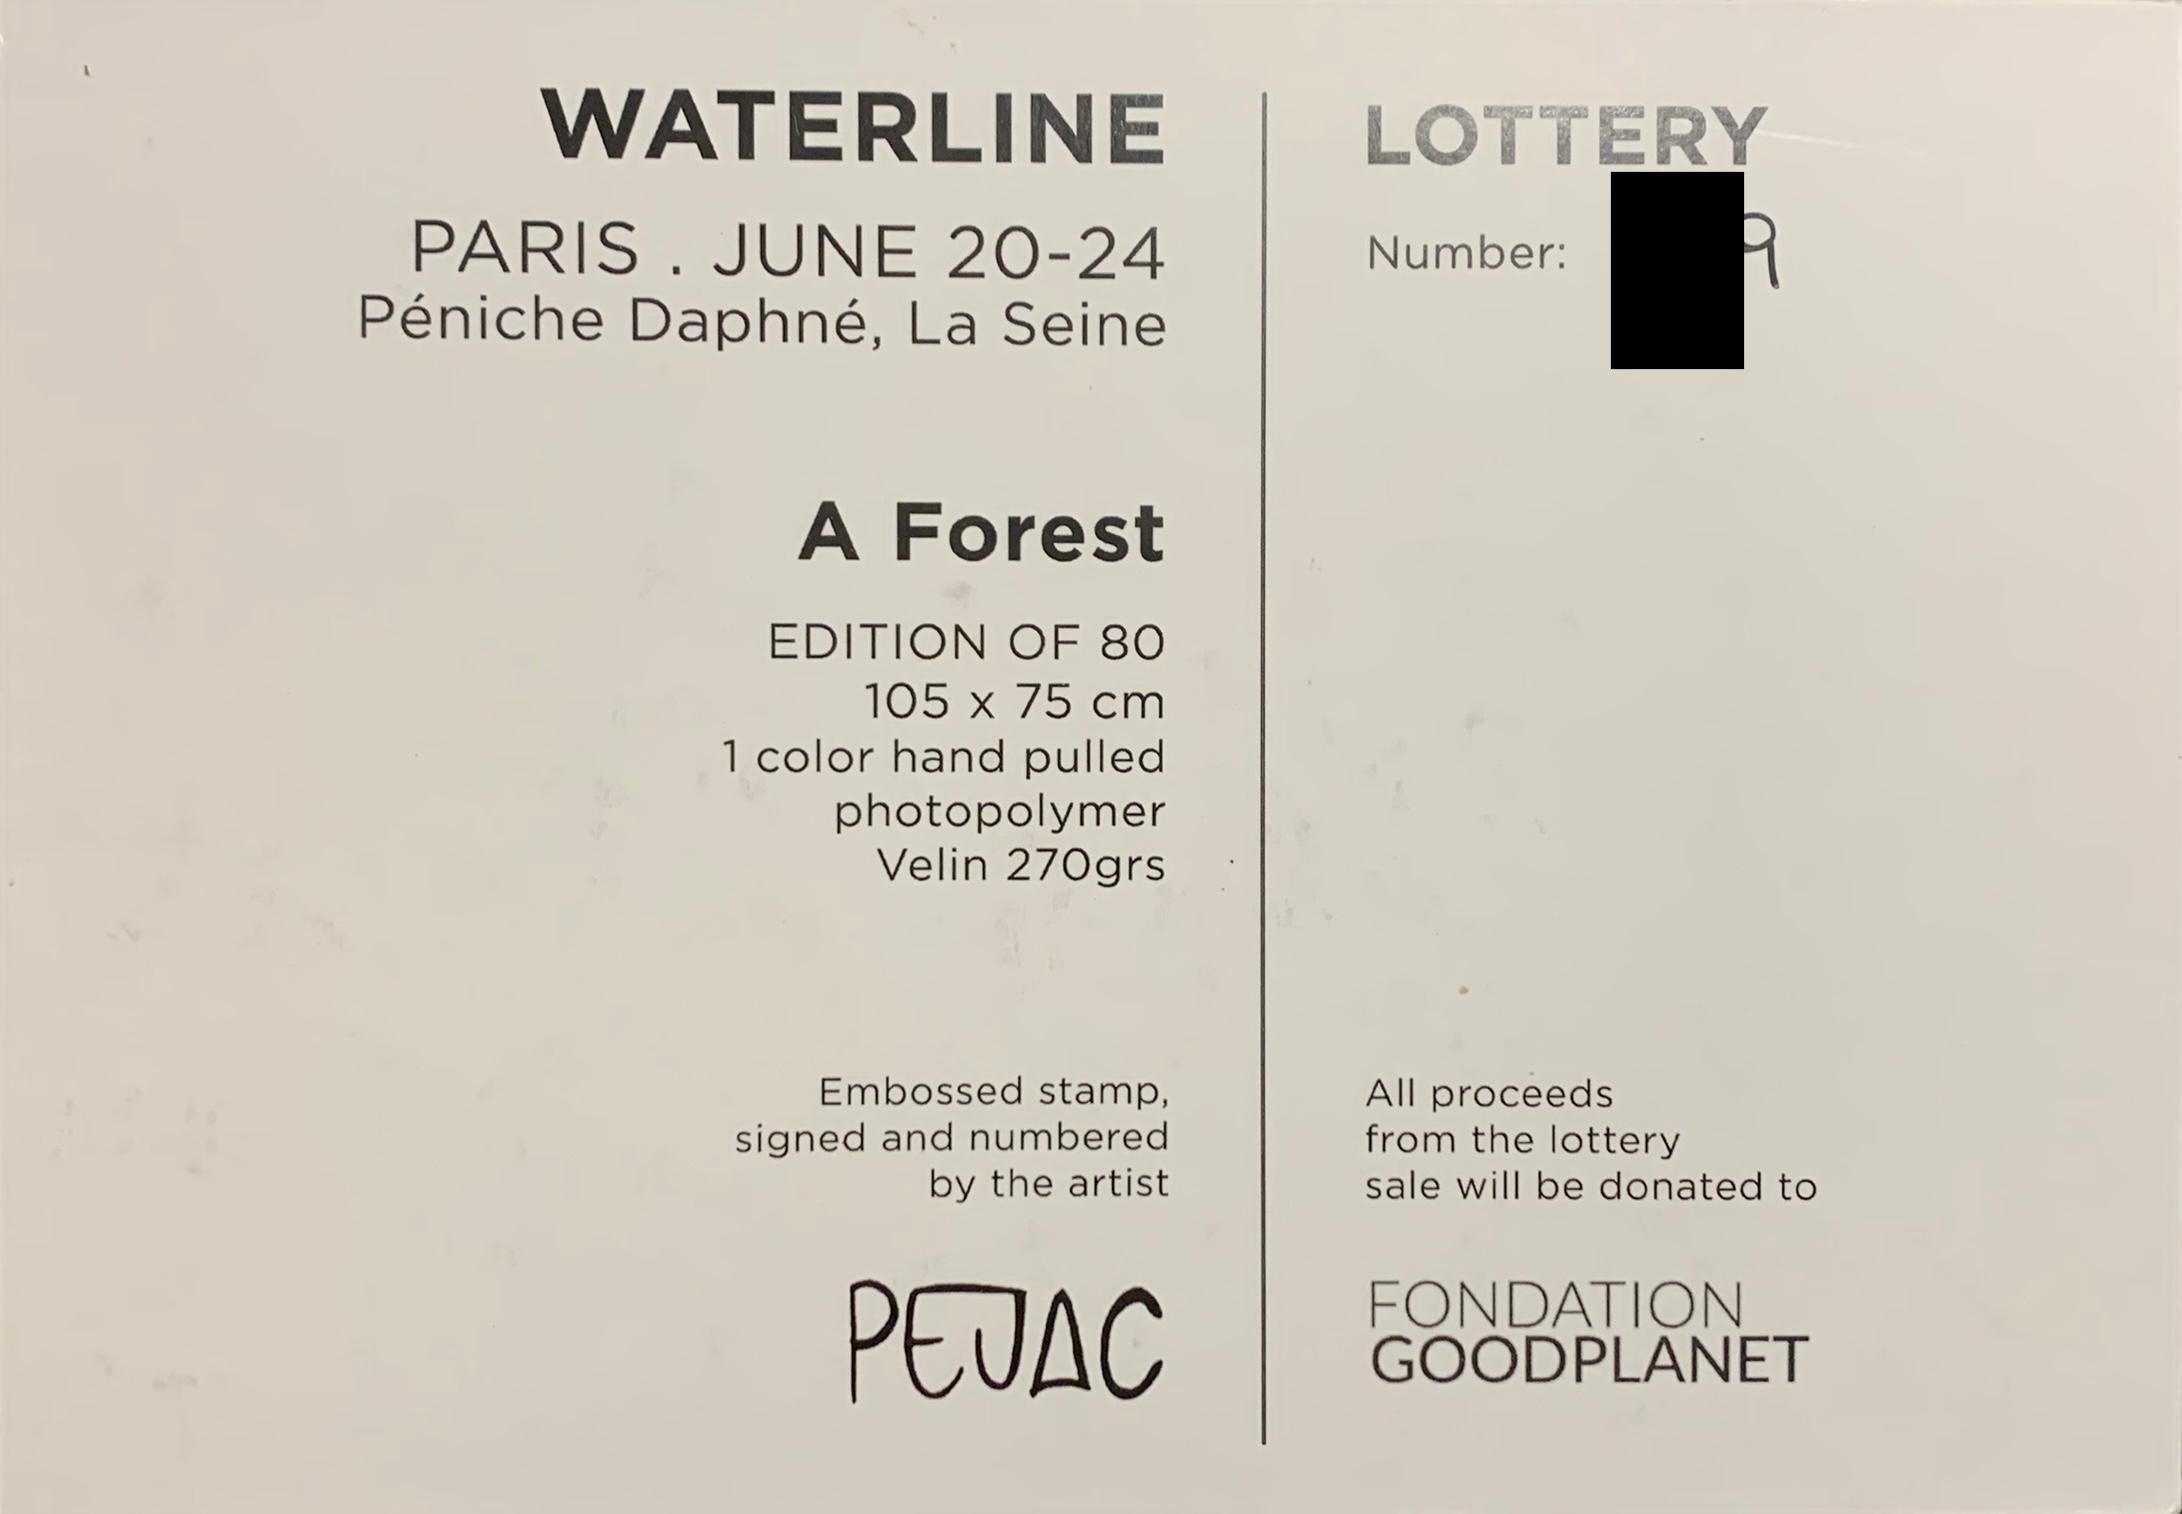 Title:
Pejac Forest Mini Print Numbered on Verso Lottery Card Street Art 
Year:
2018
Classification:
Limited edition
Medium Type:
Print
Medium/Materials:
Very Thick Stock Inverkote Albatrous 350 gr.

Categories:
Lithograph / Pop and Contemporary Pop